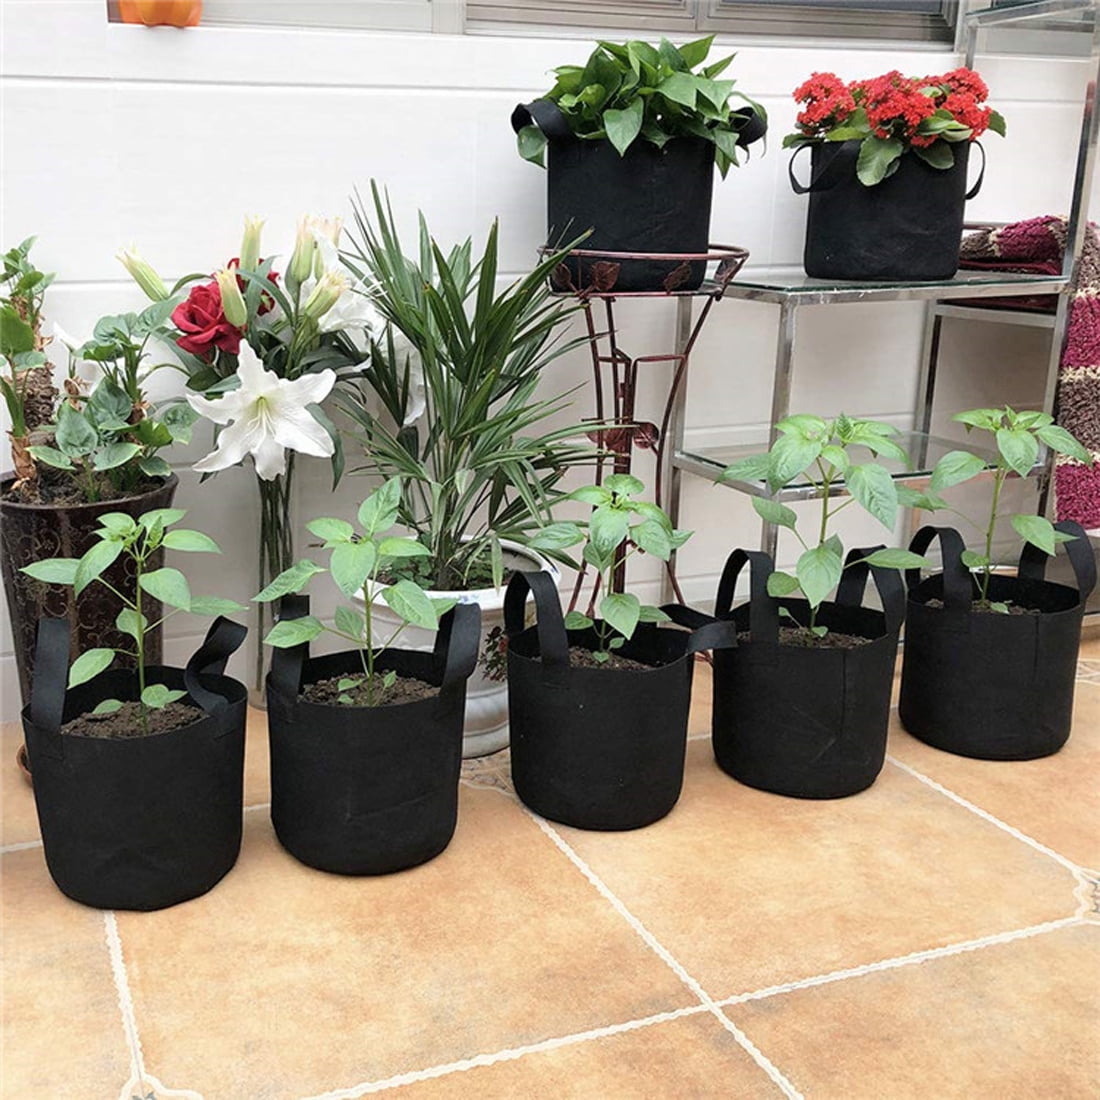 Details about   Tool Garden Planter Grow Bag Pot Home Fabric For Vegetable Growing 1pc New Black 